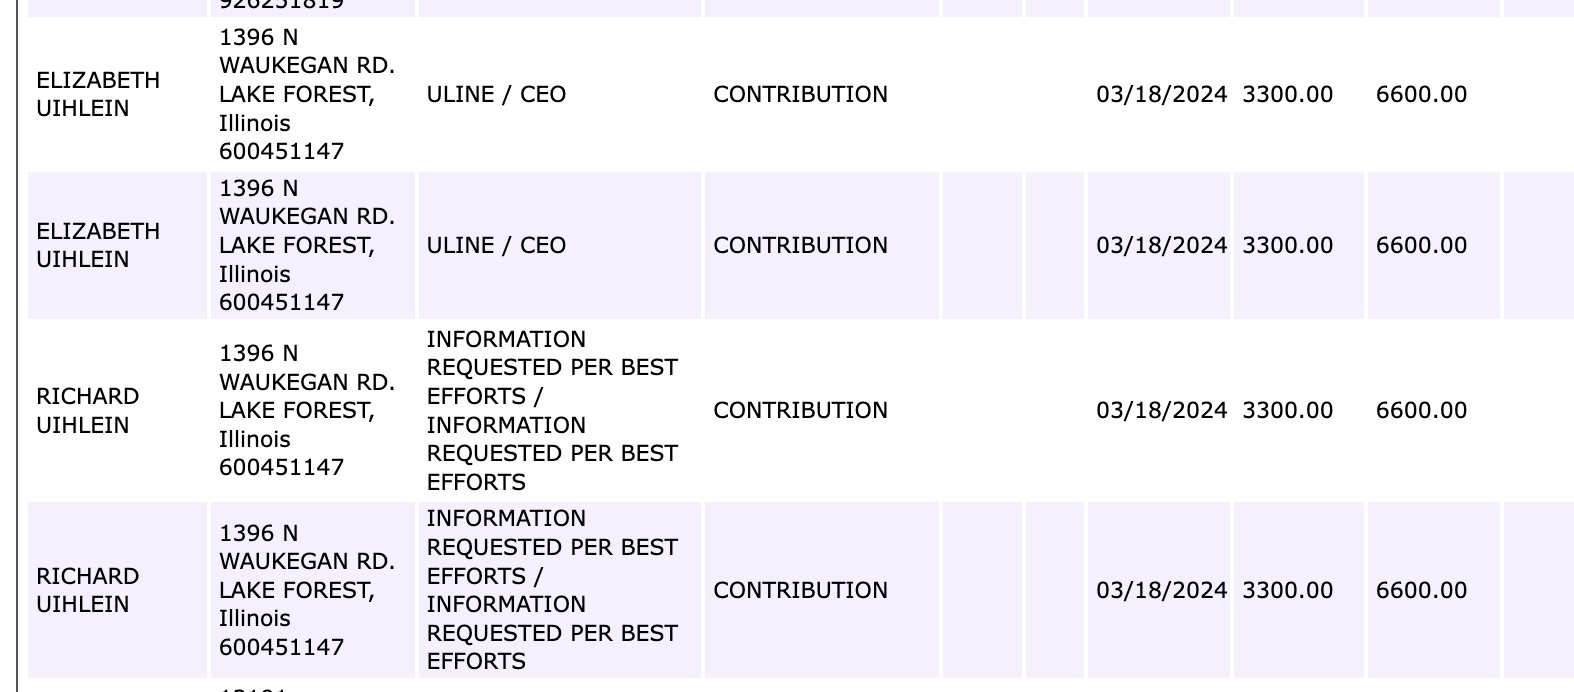 Donor records showing that Elizabeth Uihlein and Richard Uihlein have both maxed out contributions to Eric Hovde